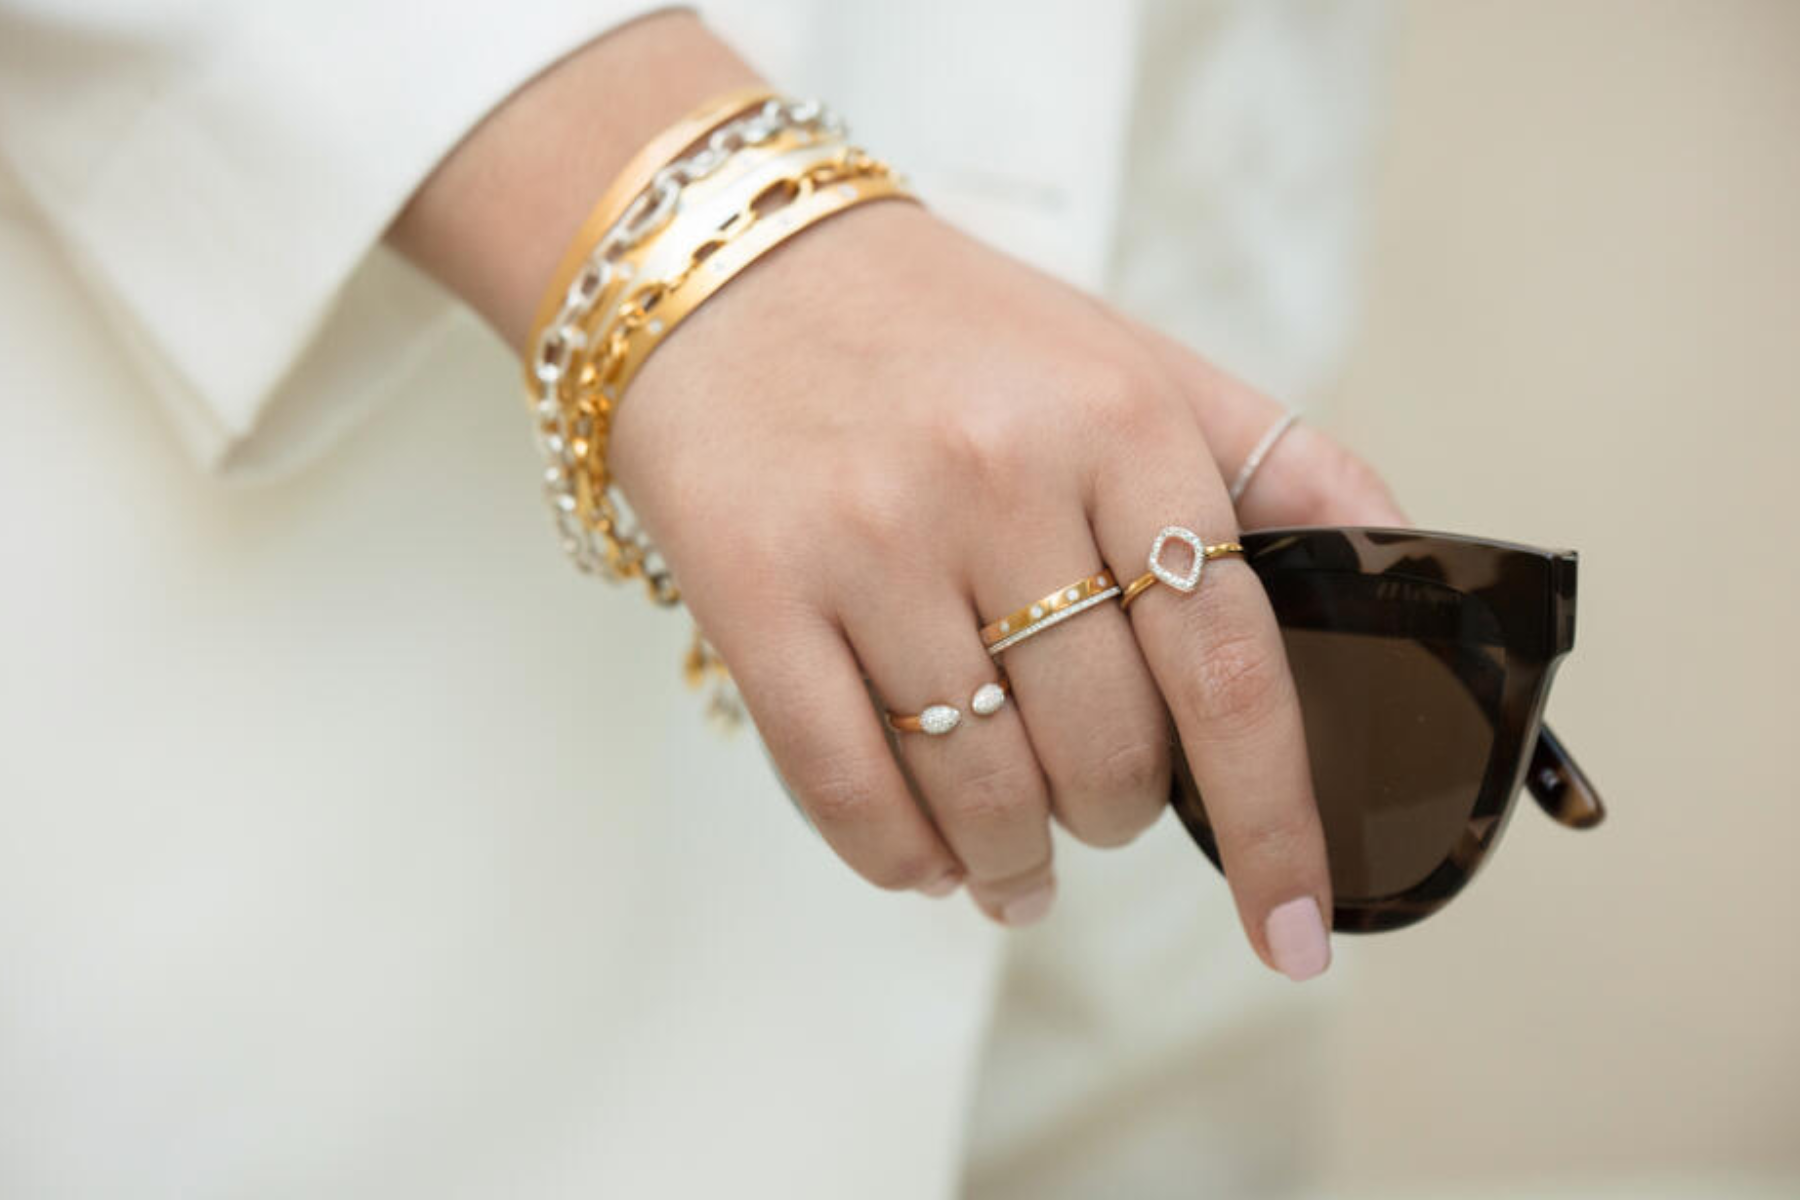 A woman in white wearing gold bracelets and rings and holding a sunglass